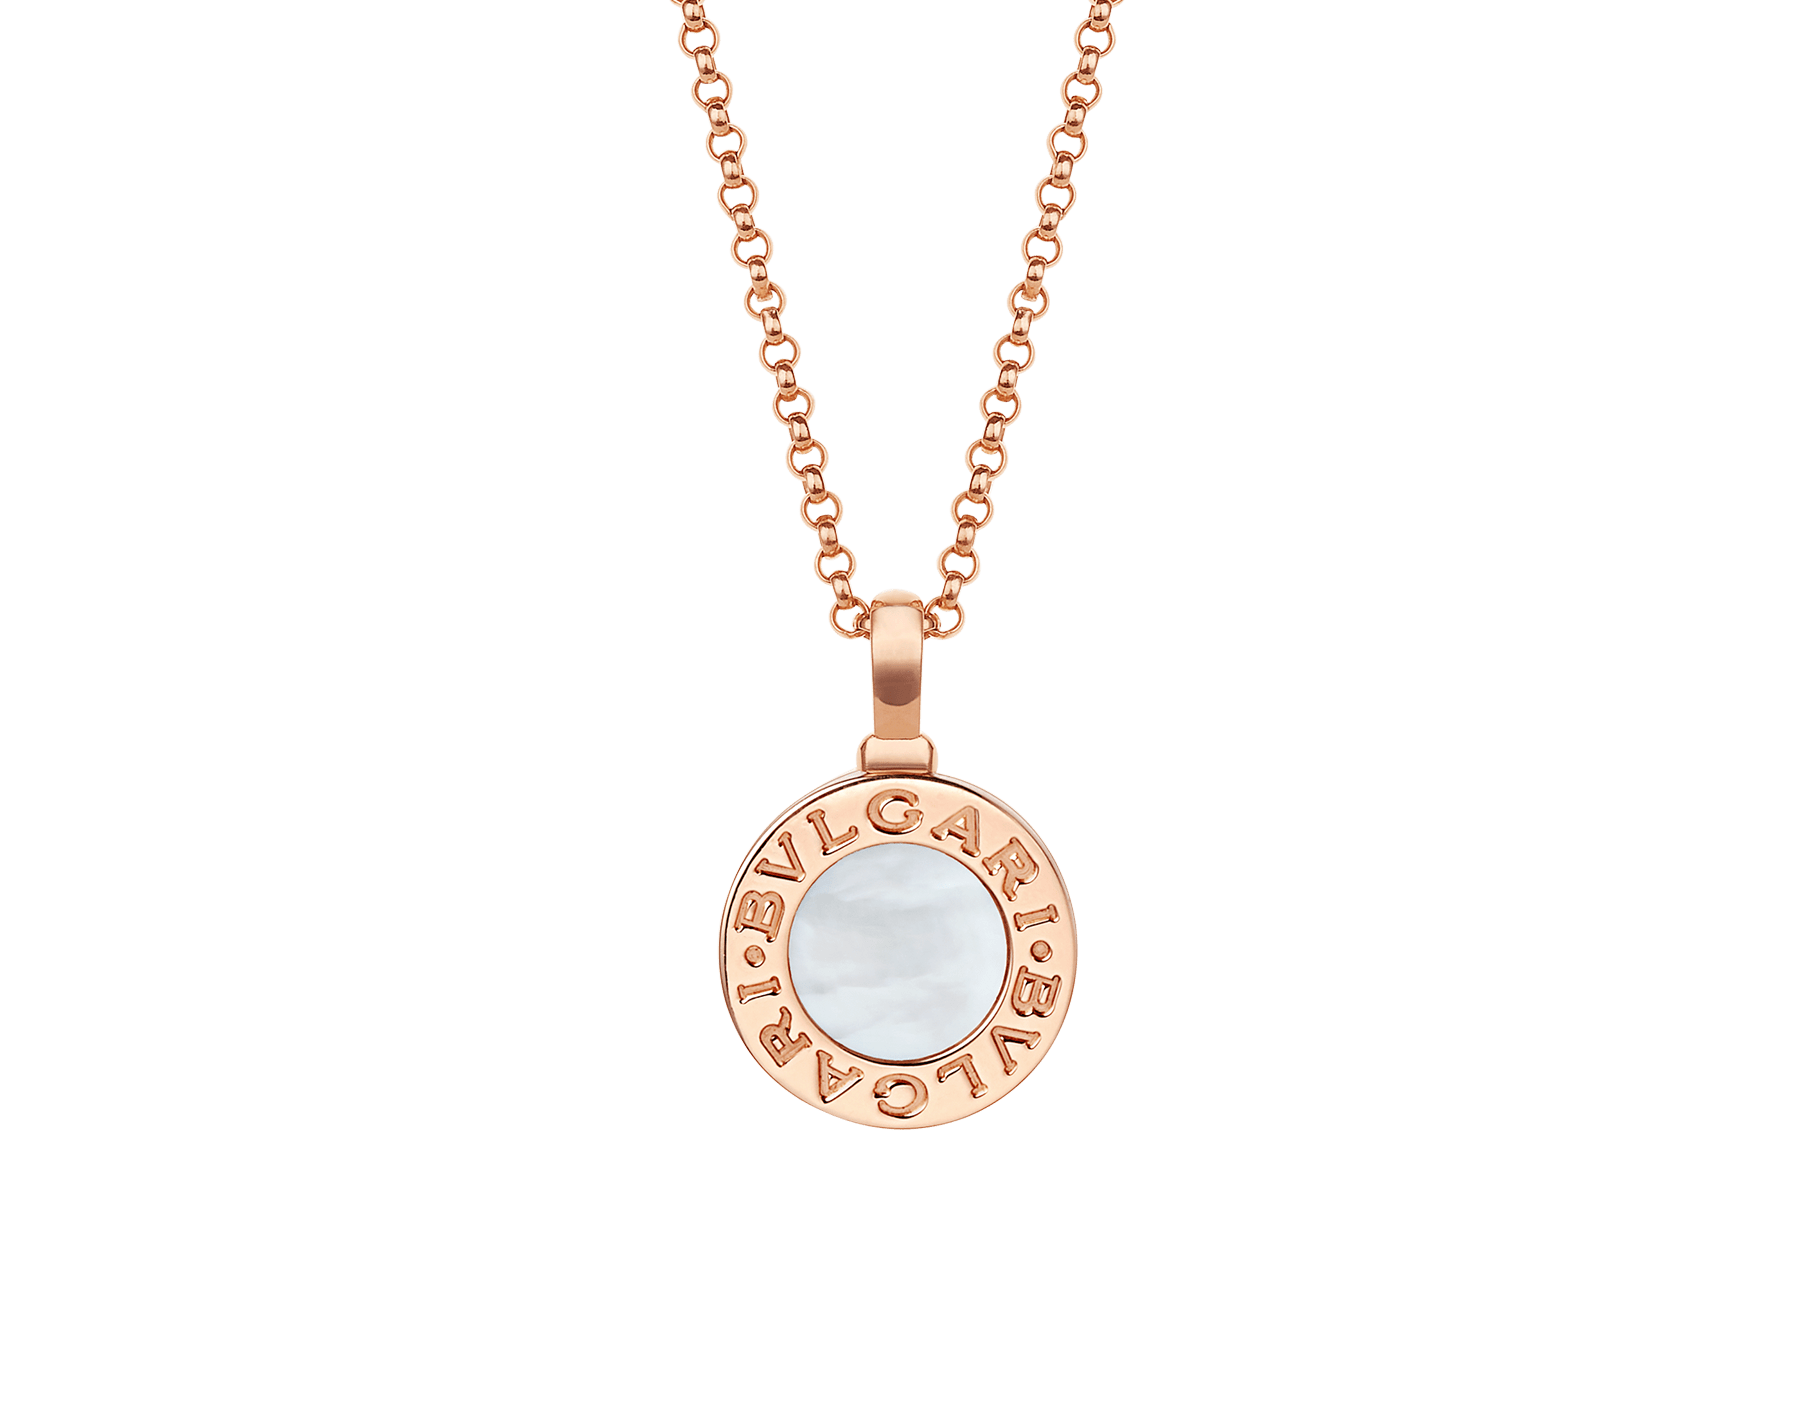 BVLGARI BVLGARI 18 kt rose gold circle pendant necklace with chain set with white mother-of-pearl insert, customizable with engraving on the back 358376 image 1